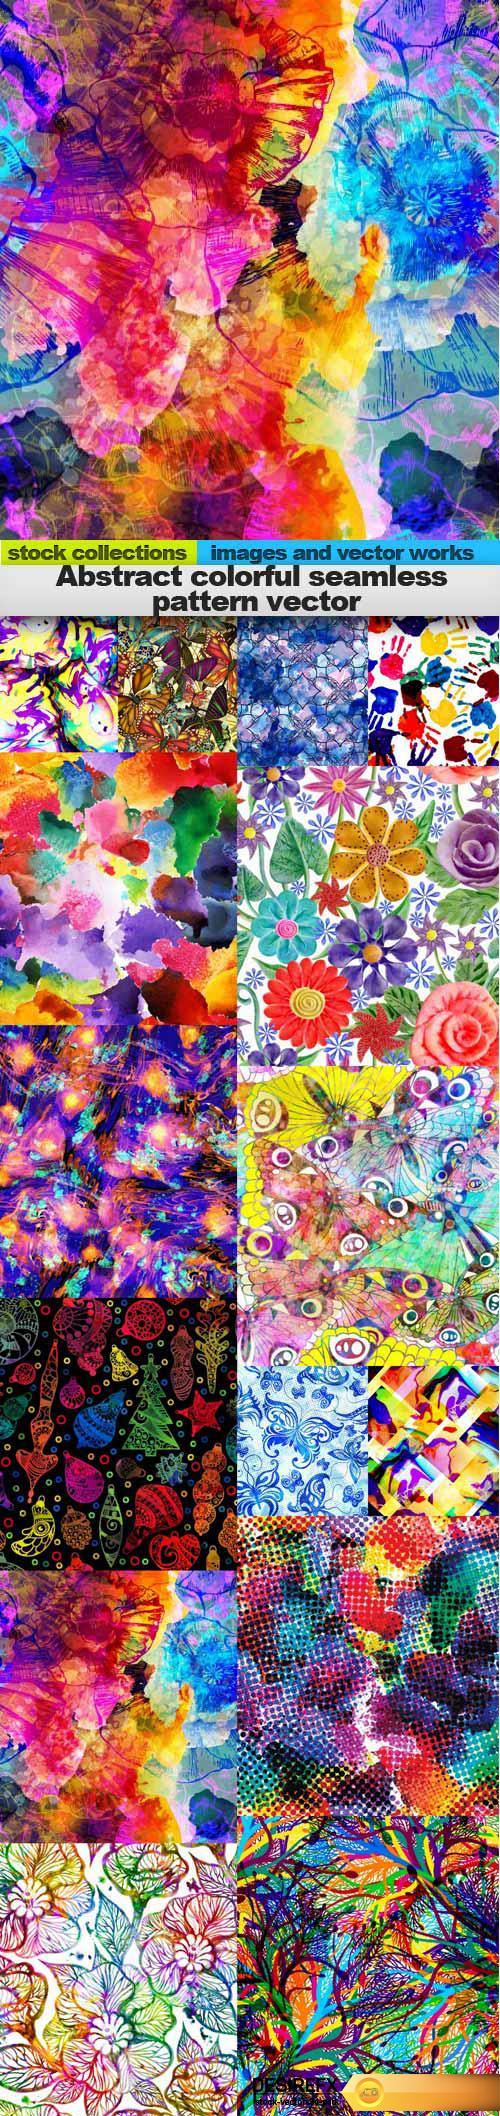 Abstract floral background vector, 15 x EPS